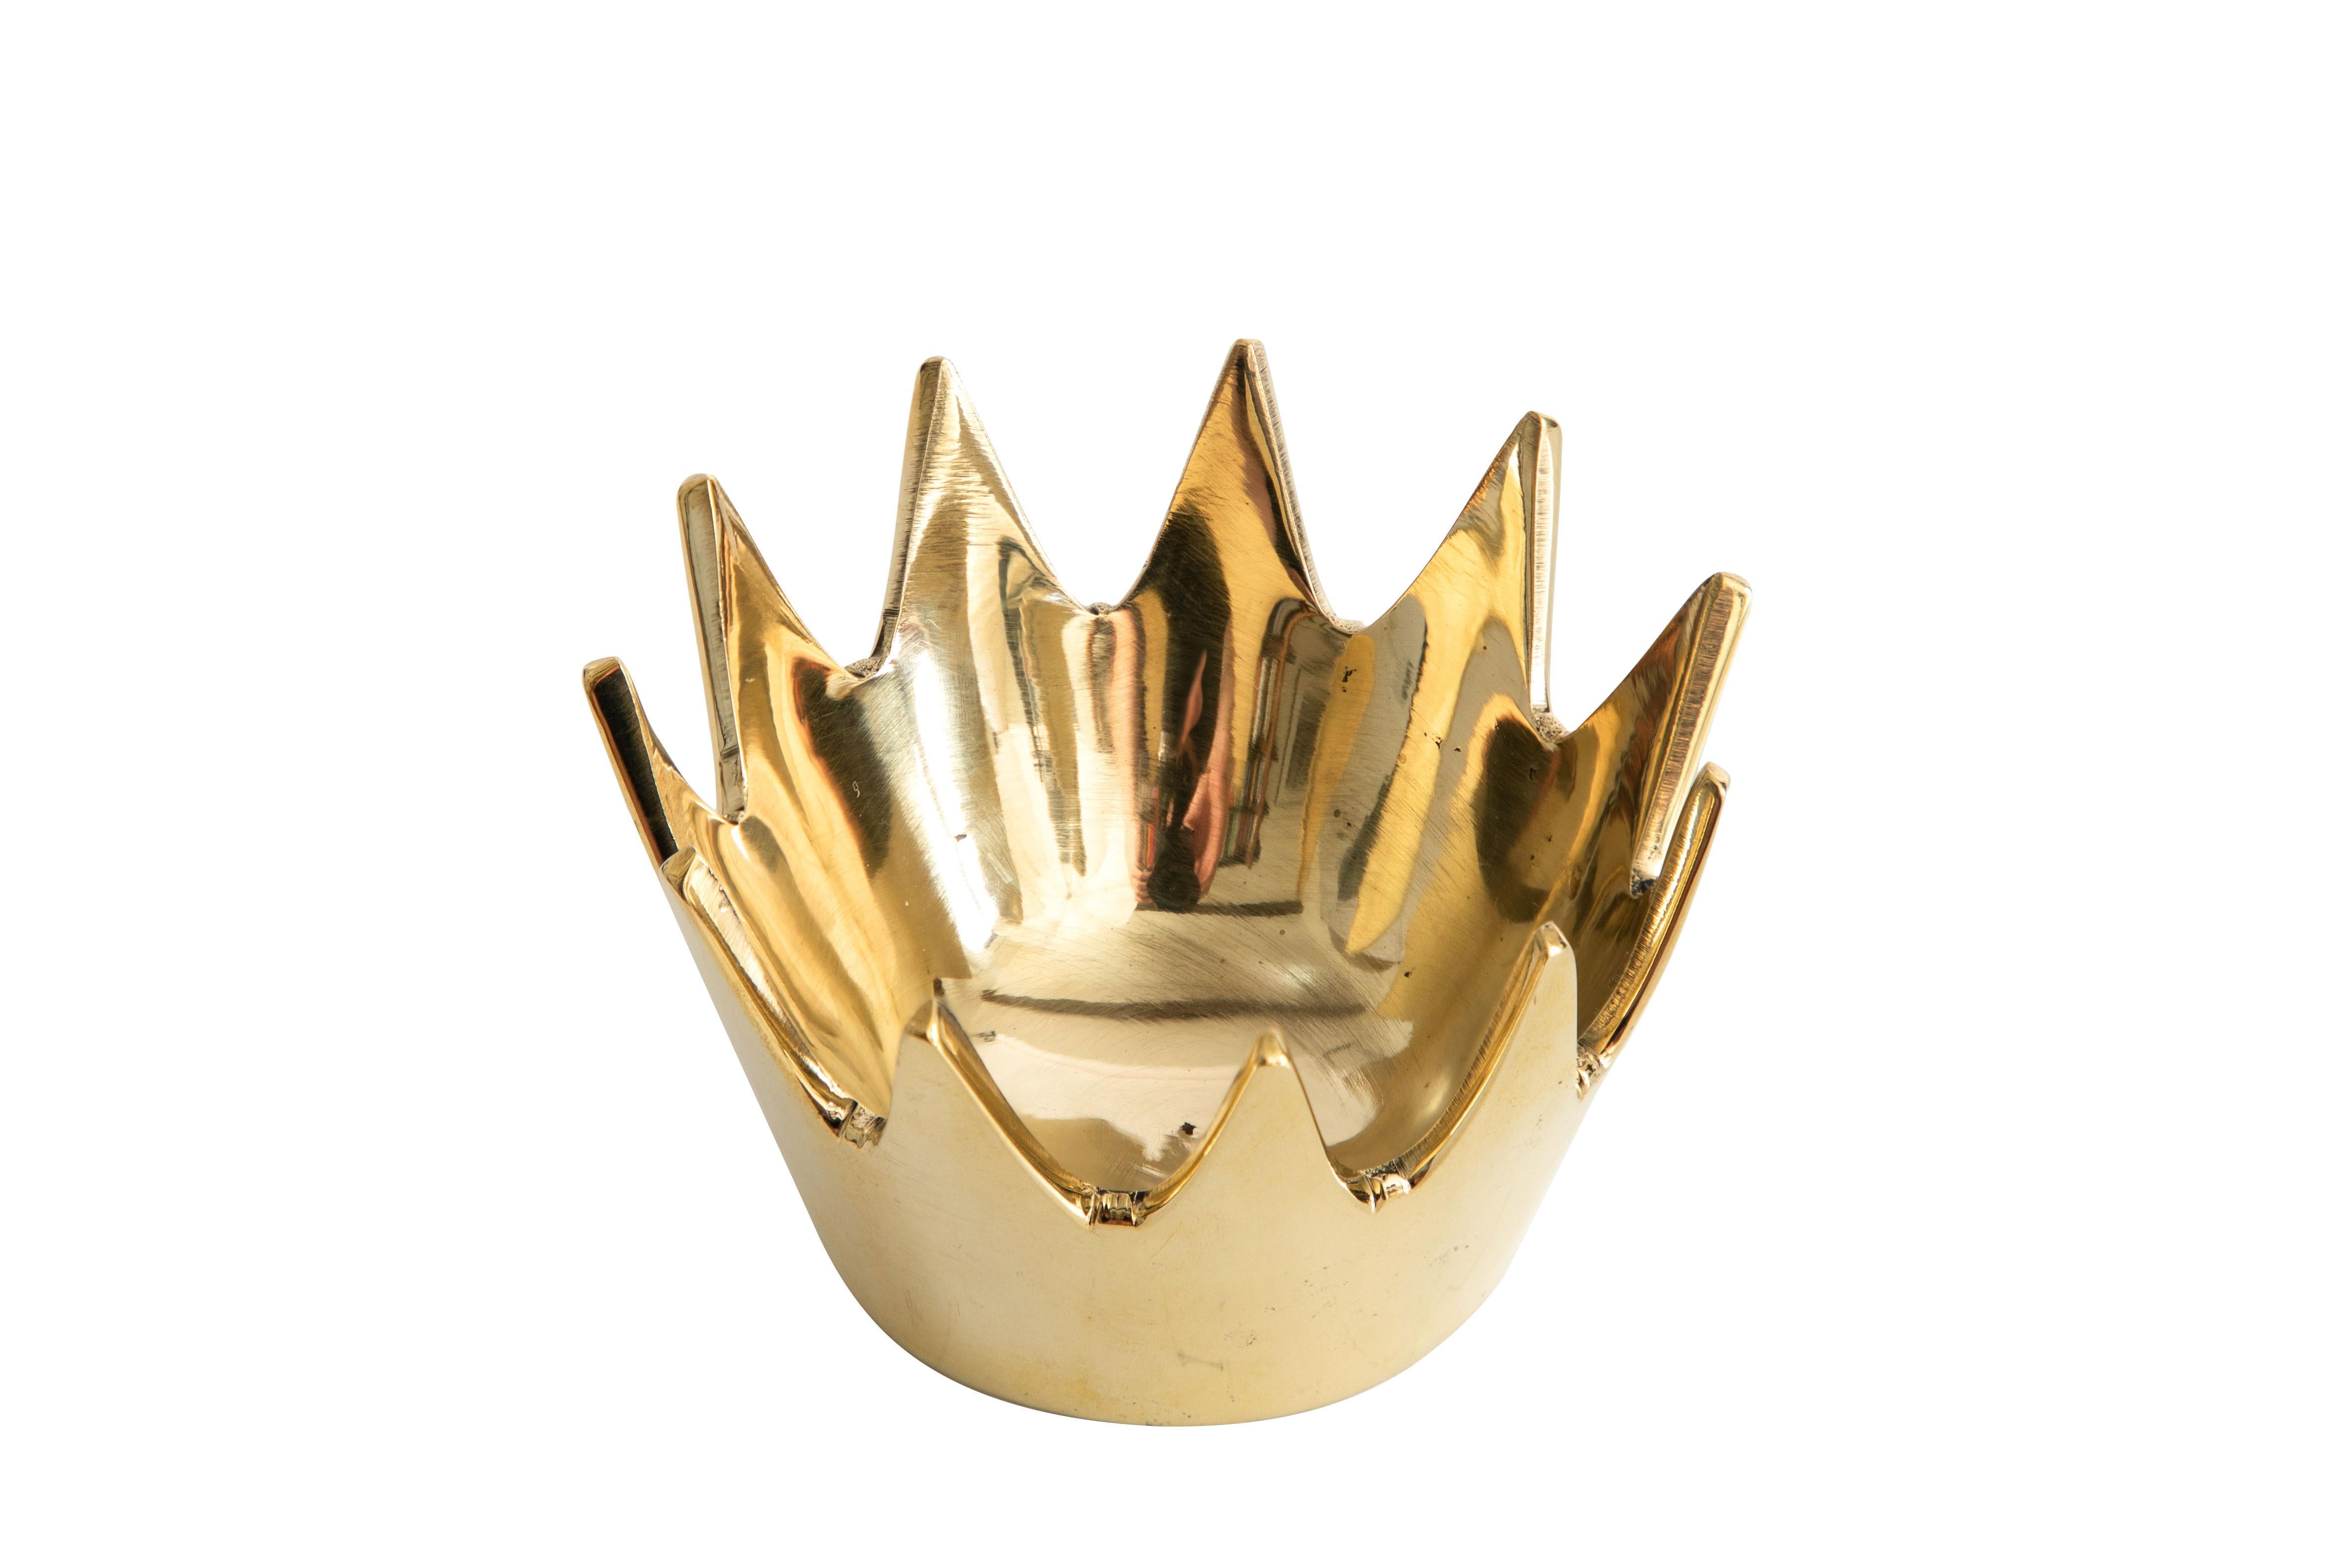 Carl Auböck model #3600 'Crown' brass bowl. Designed in the 1950s, this incredibly refined and sculptural Viennese bowl is executed in polished brass. Originally conceived as an ashtray, this decorative vessel can be used for a variety of